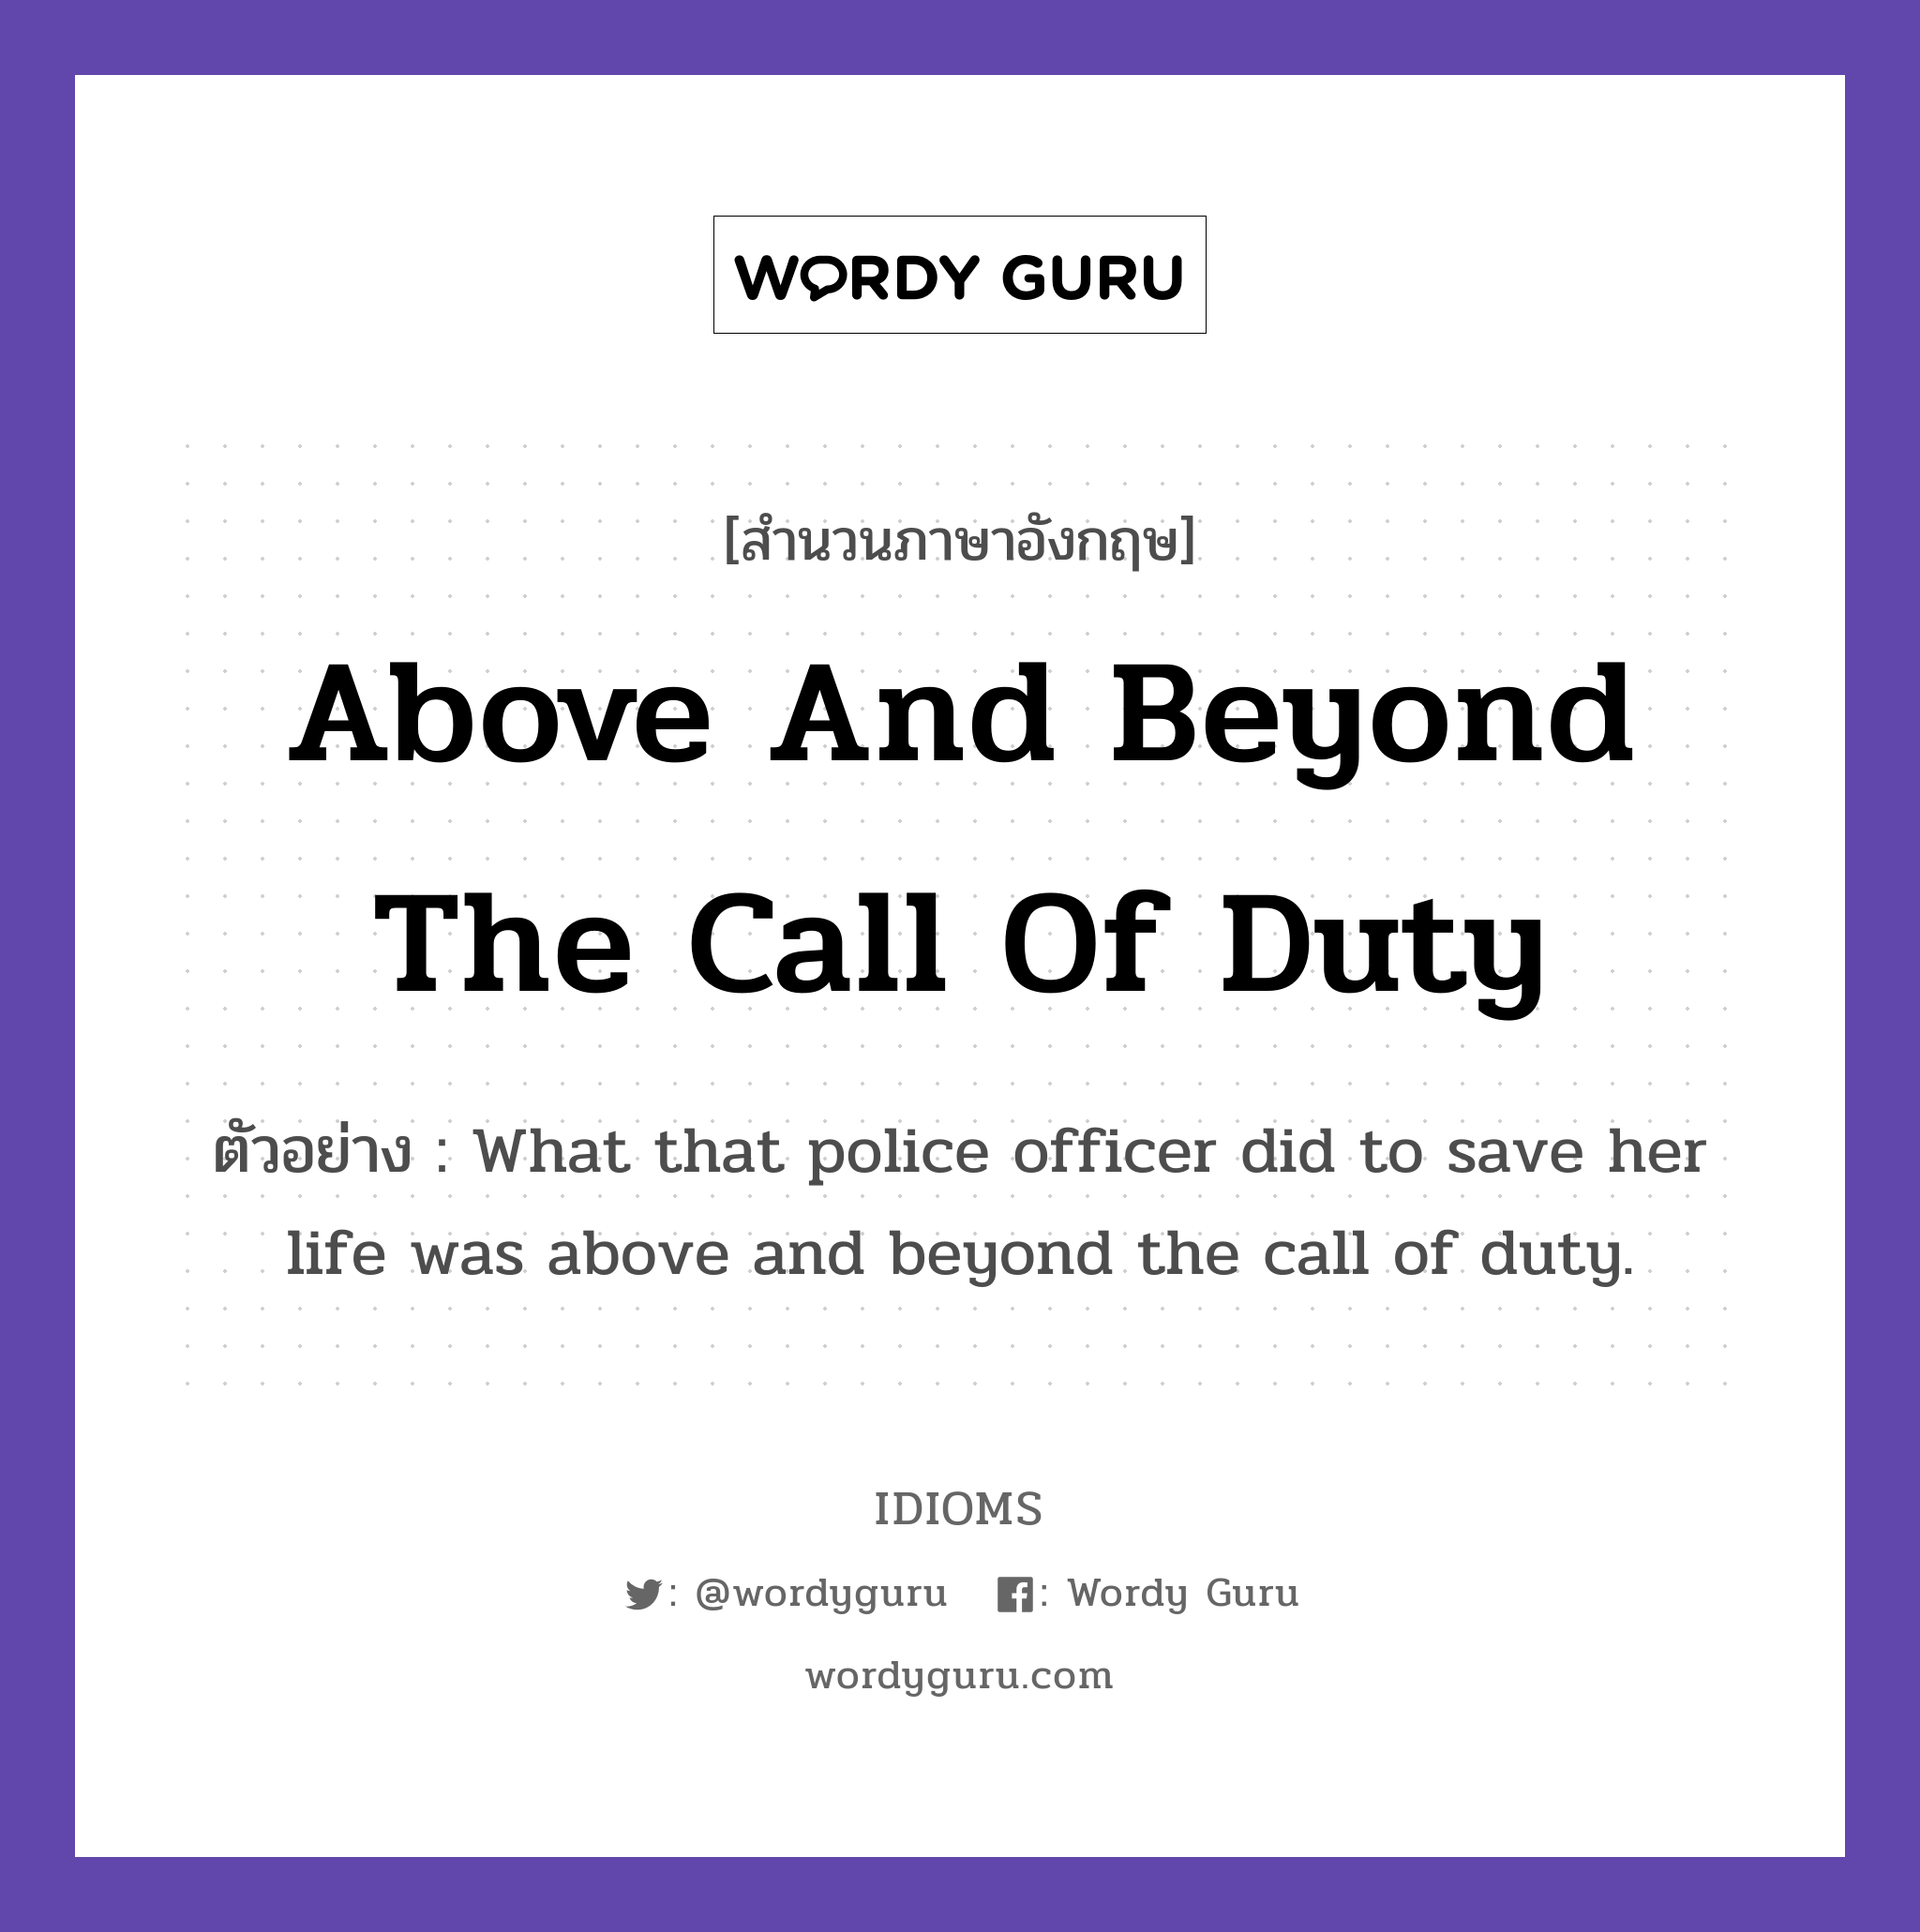 Above And Beyond The Call Of Duty แปลว่า?, สำนวนภาษาอังกฤษ Above And Beyond The Call Of Duty ตัวอย่าง What that police officer did to save her life was above and beyond the call of duty.